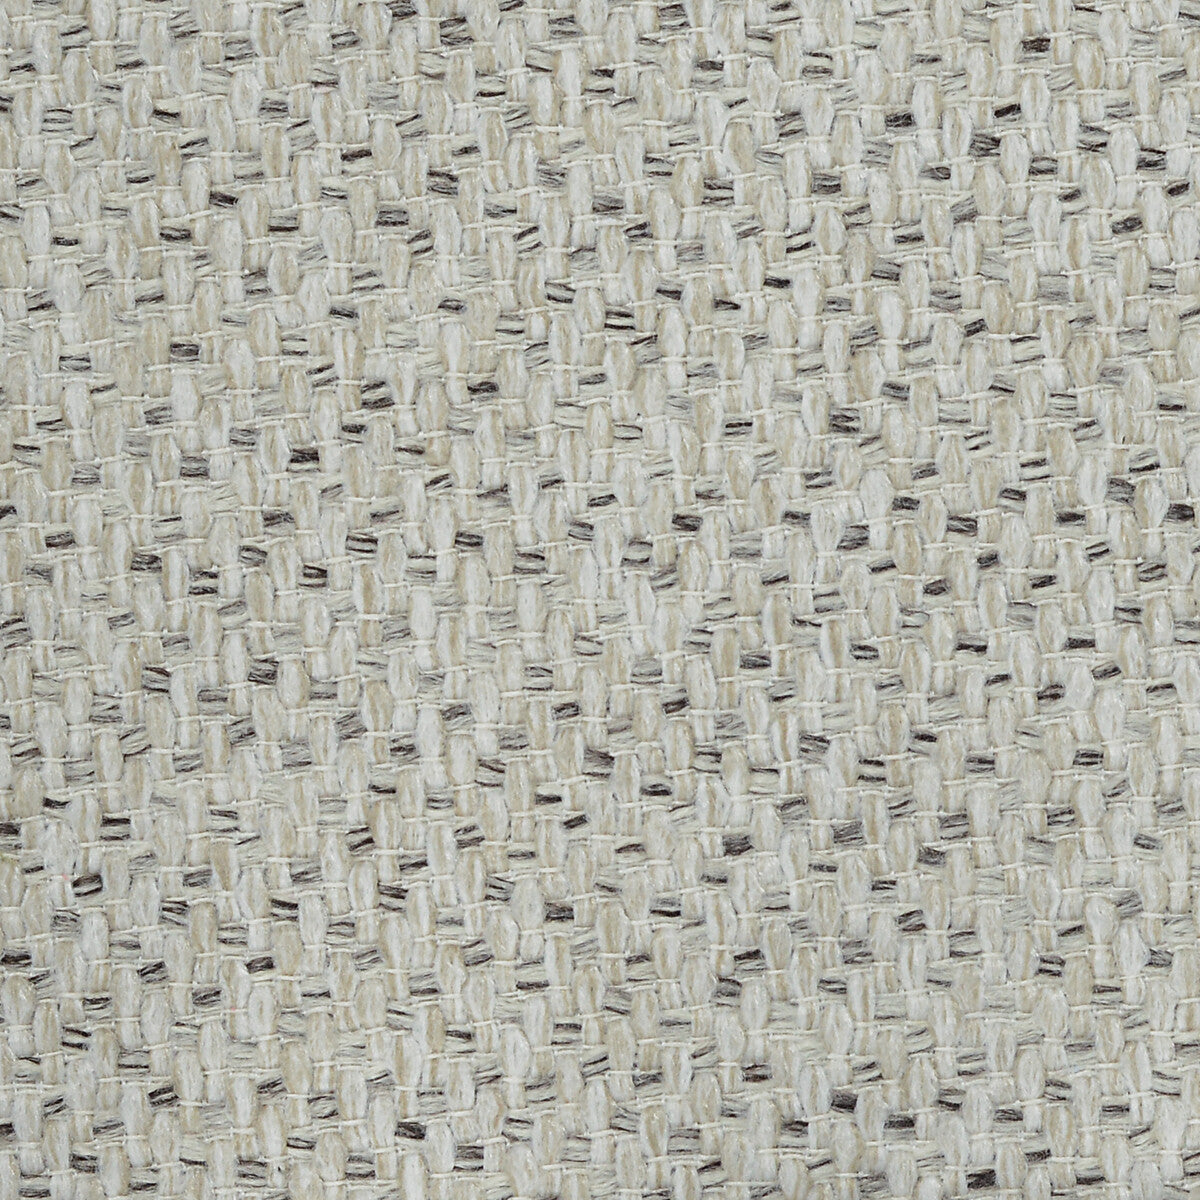 Kravet Contract fabric in 35180-616 color - pattern 35180.616.0 - by Kravet Contract